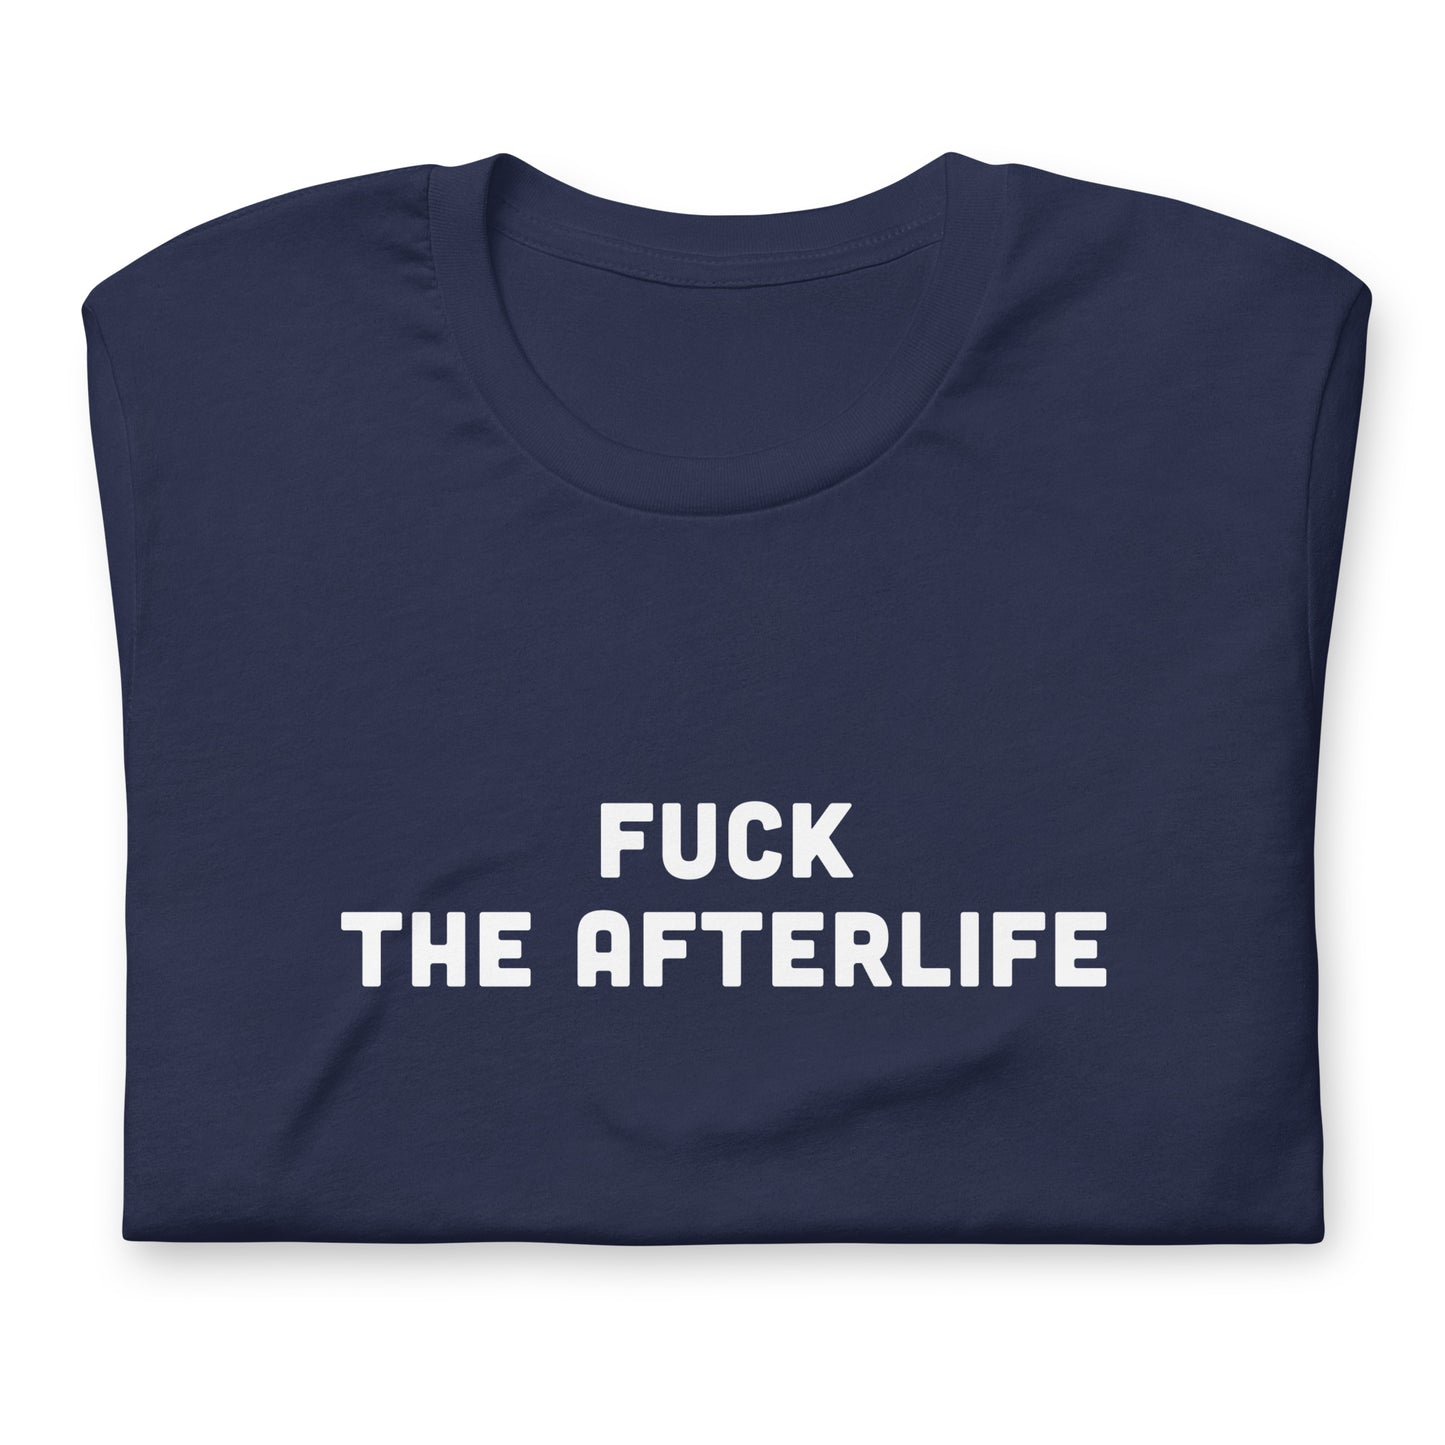 Fuck The Afterlife T-Shirt Size M Color Black